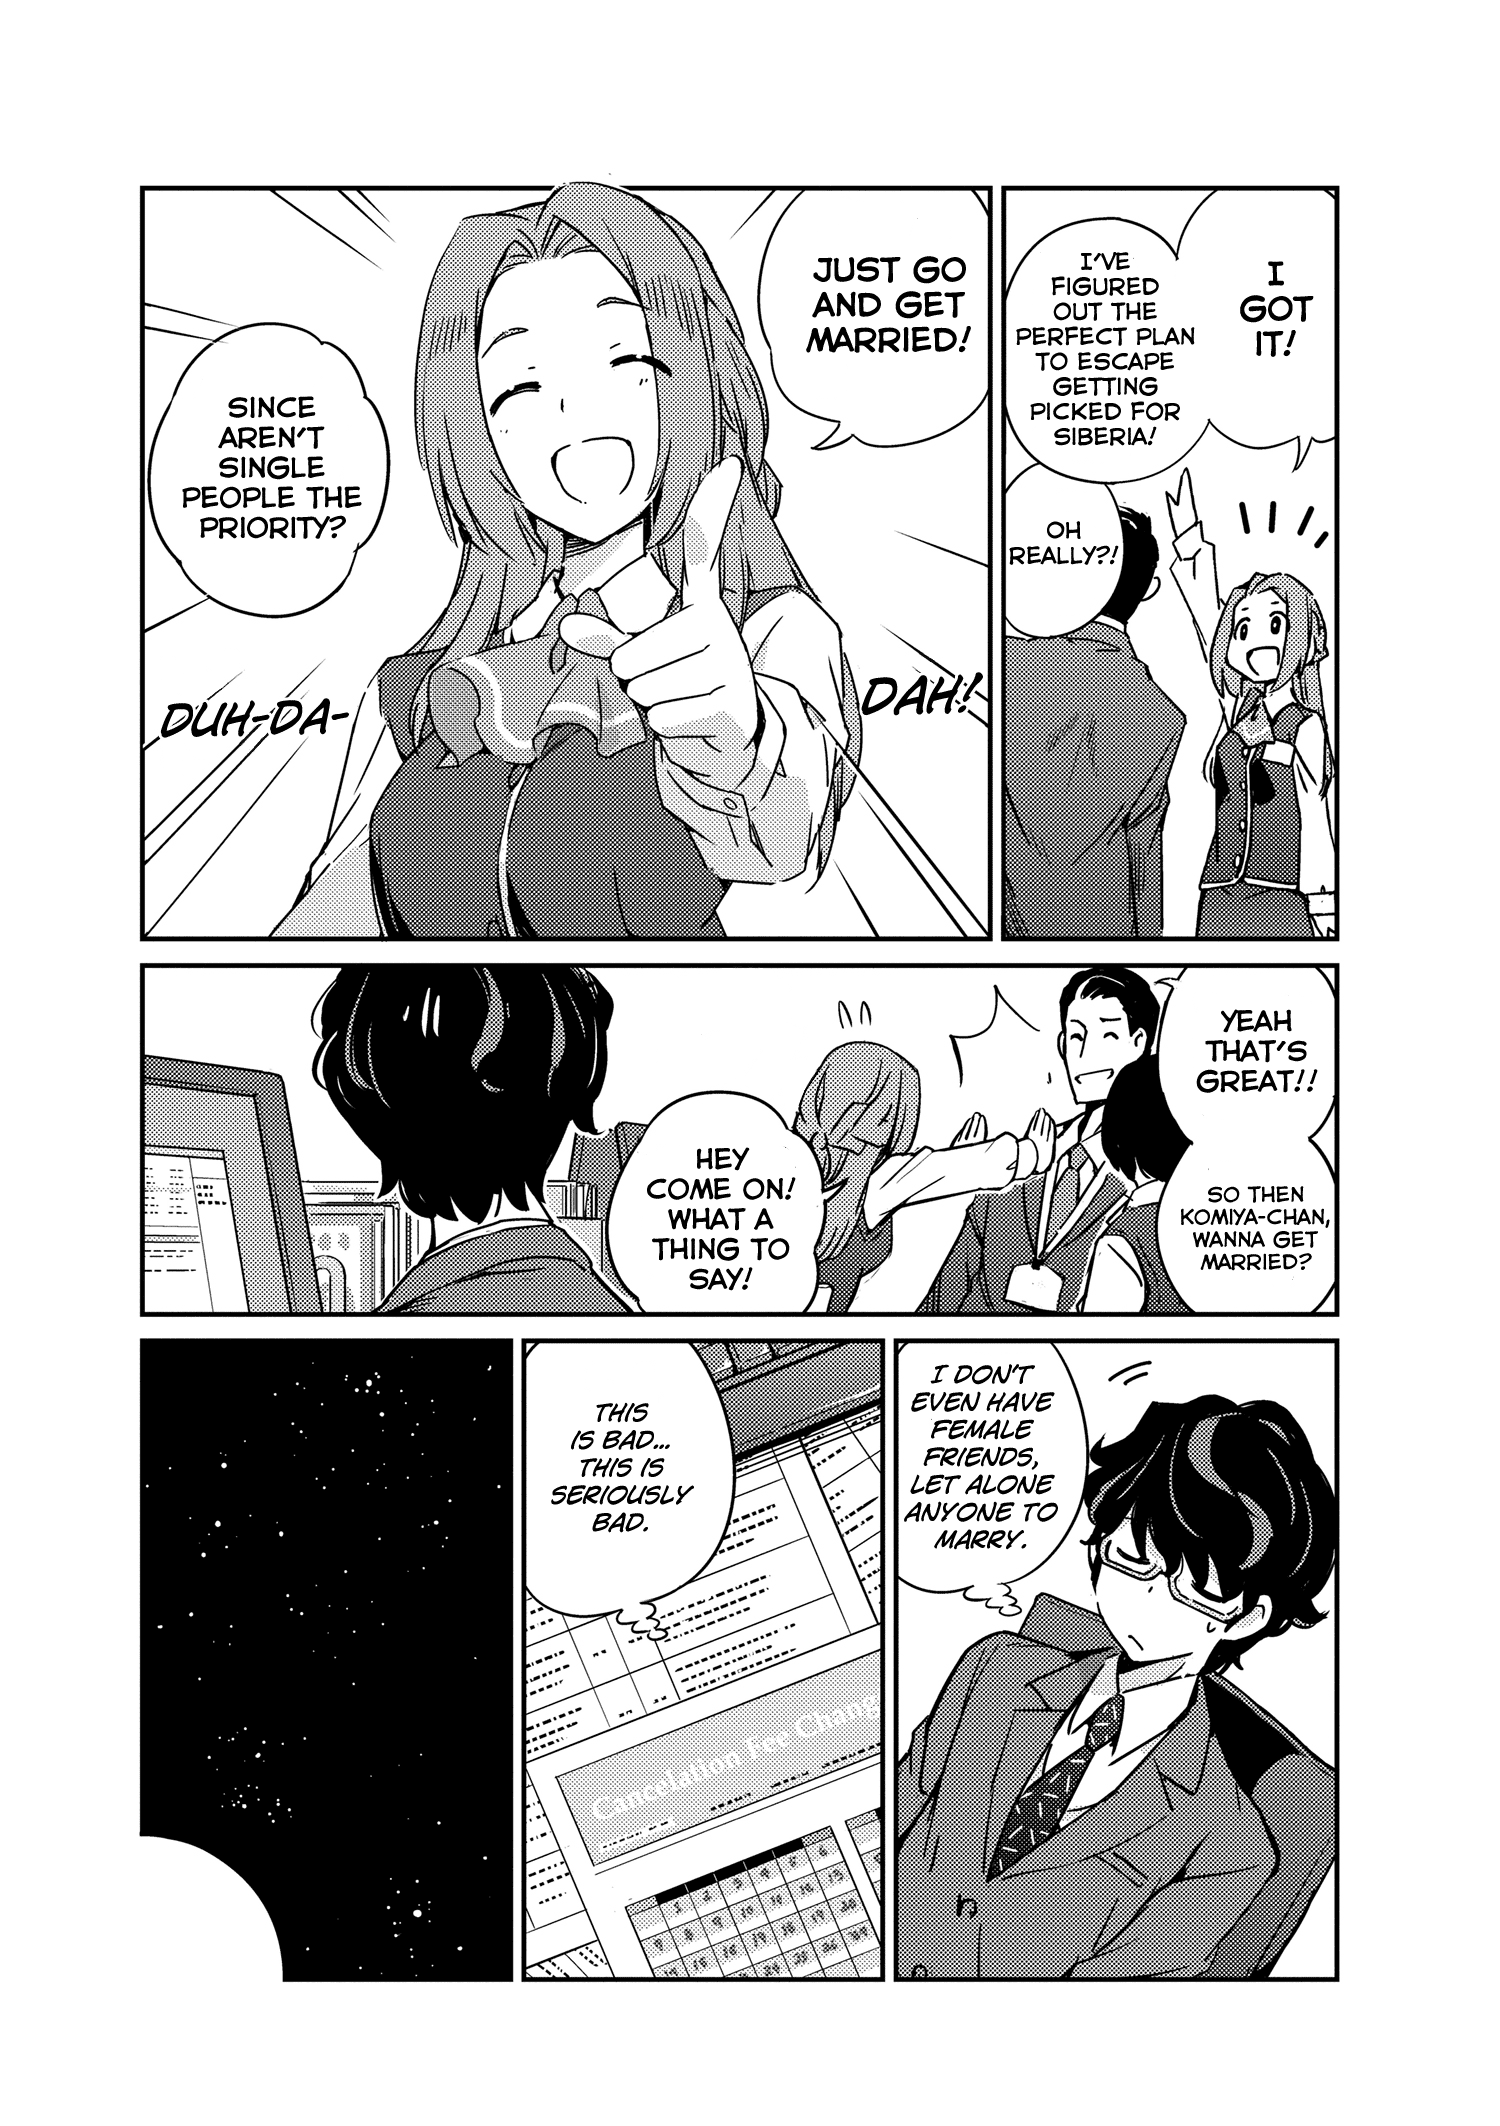 Are You Really Getting Married? - 1 page 26